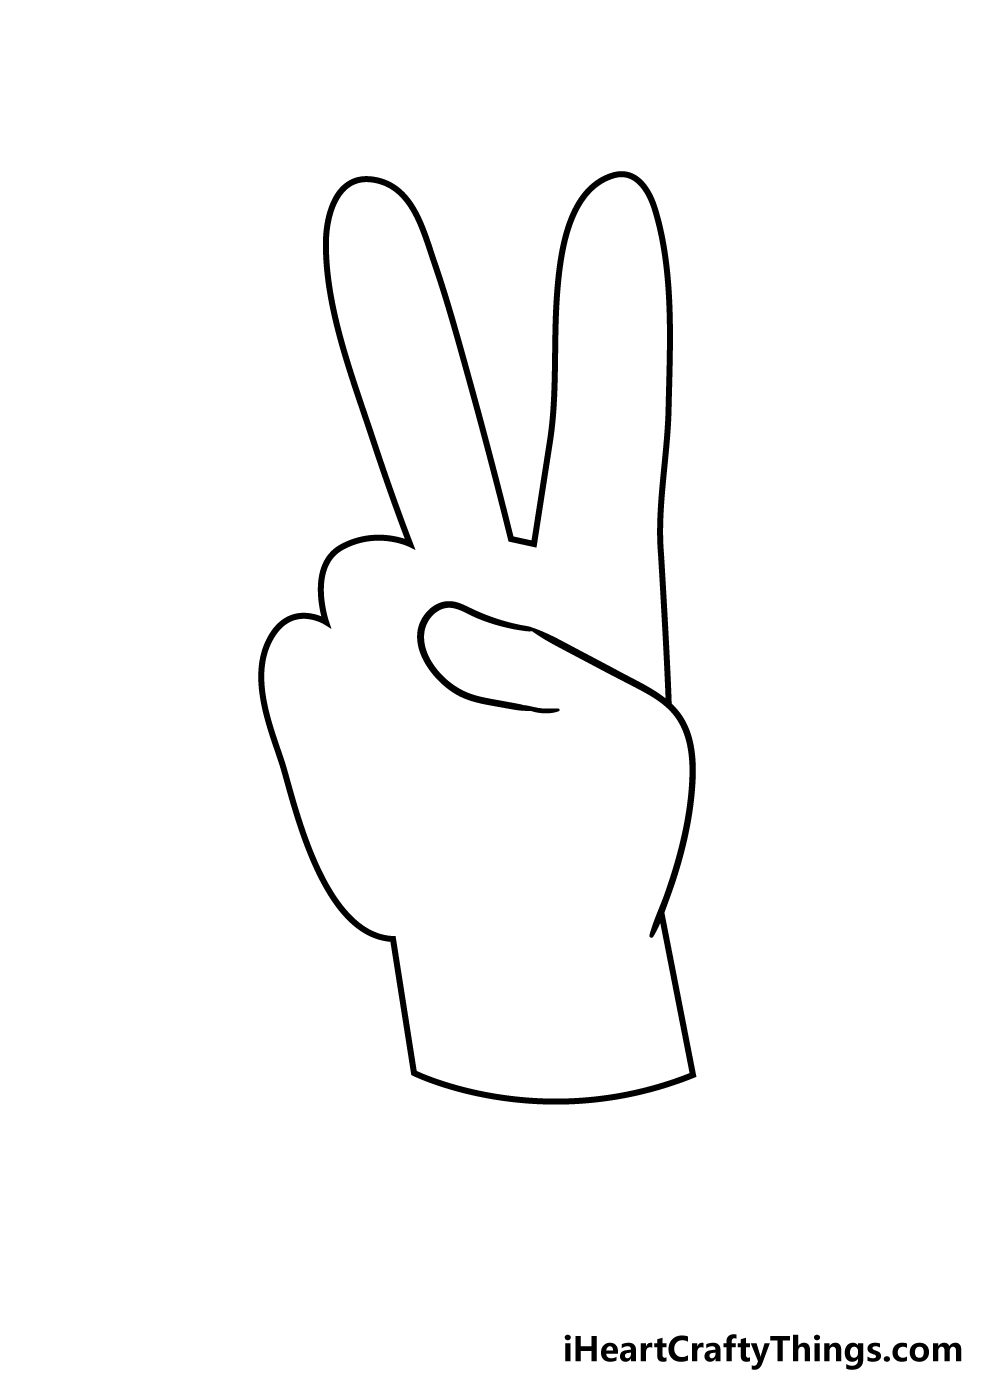 peace sign drawing step 3